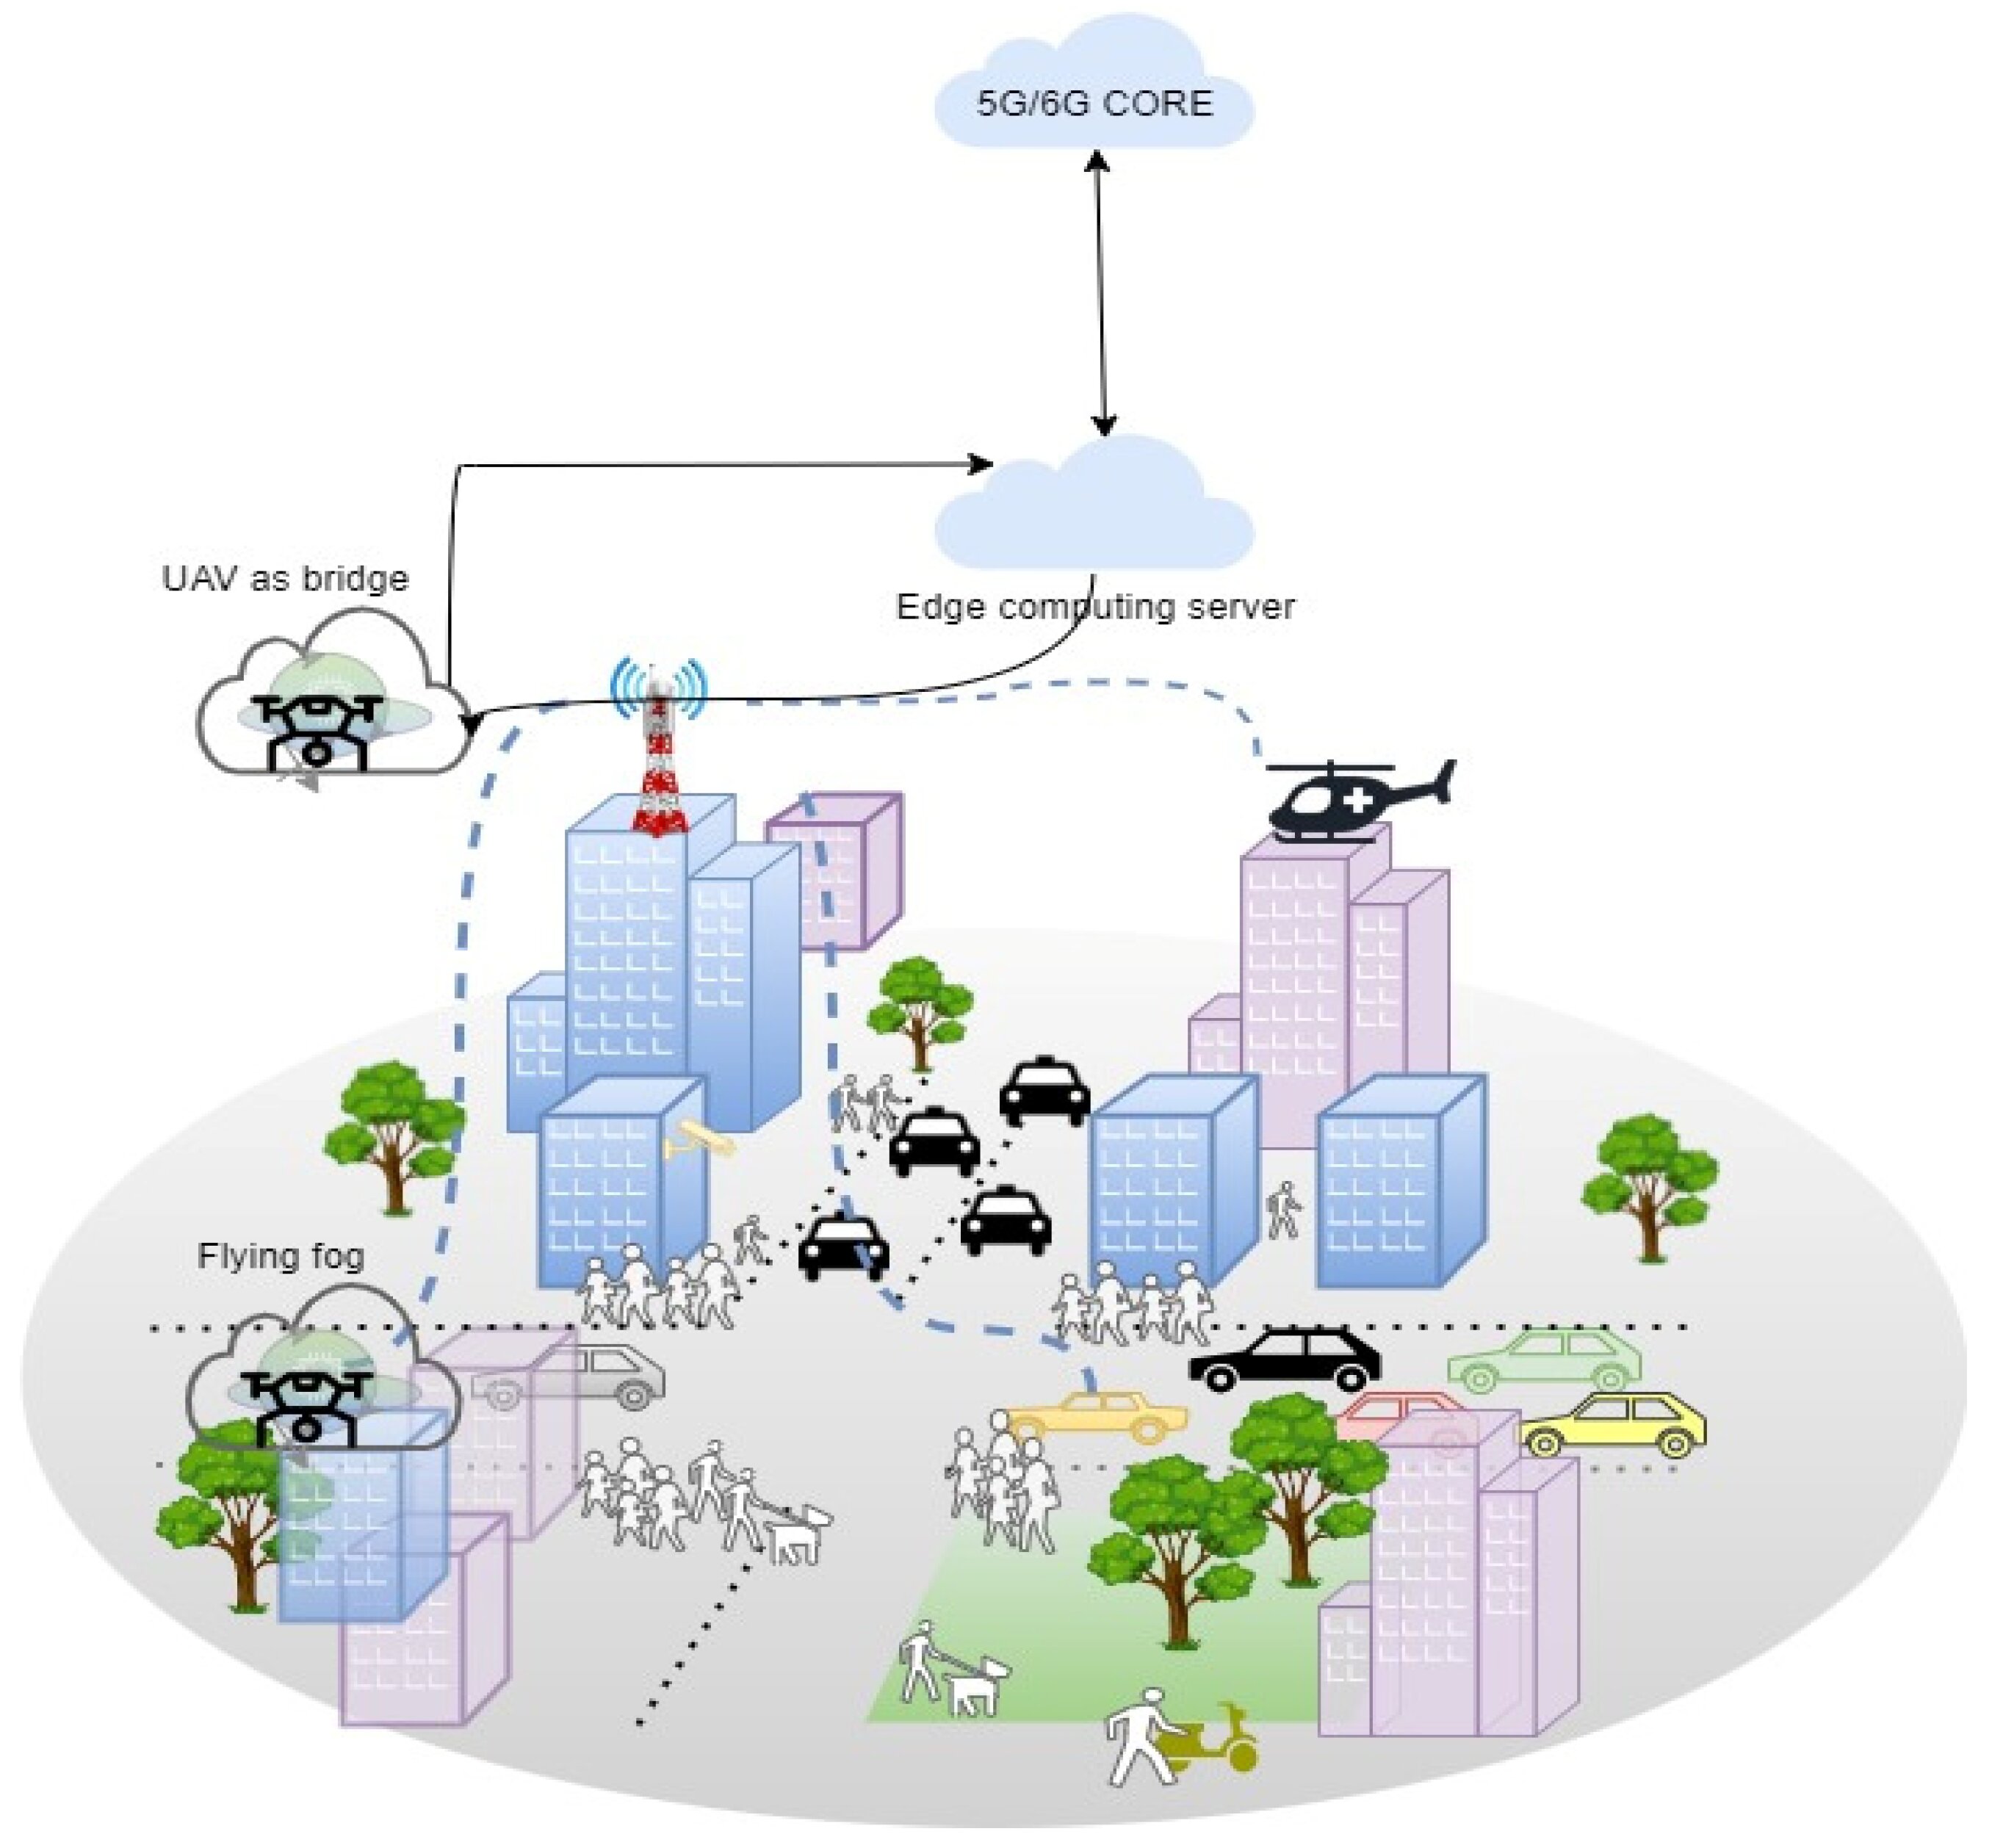 Researchers propose new scheme for Internet of Things that uses fog computing